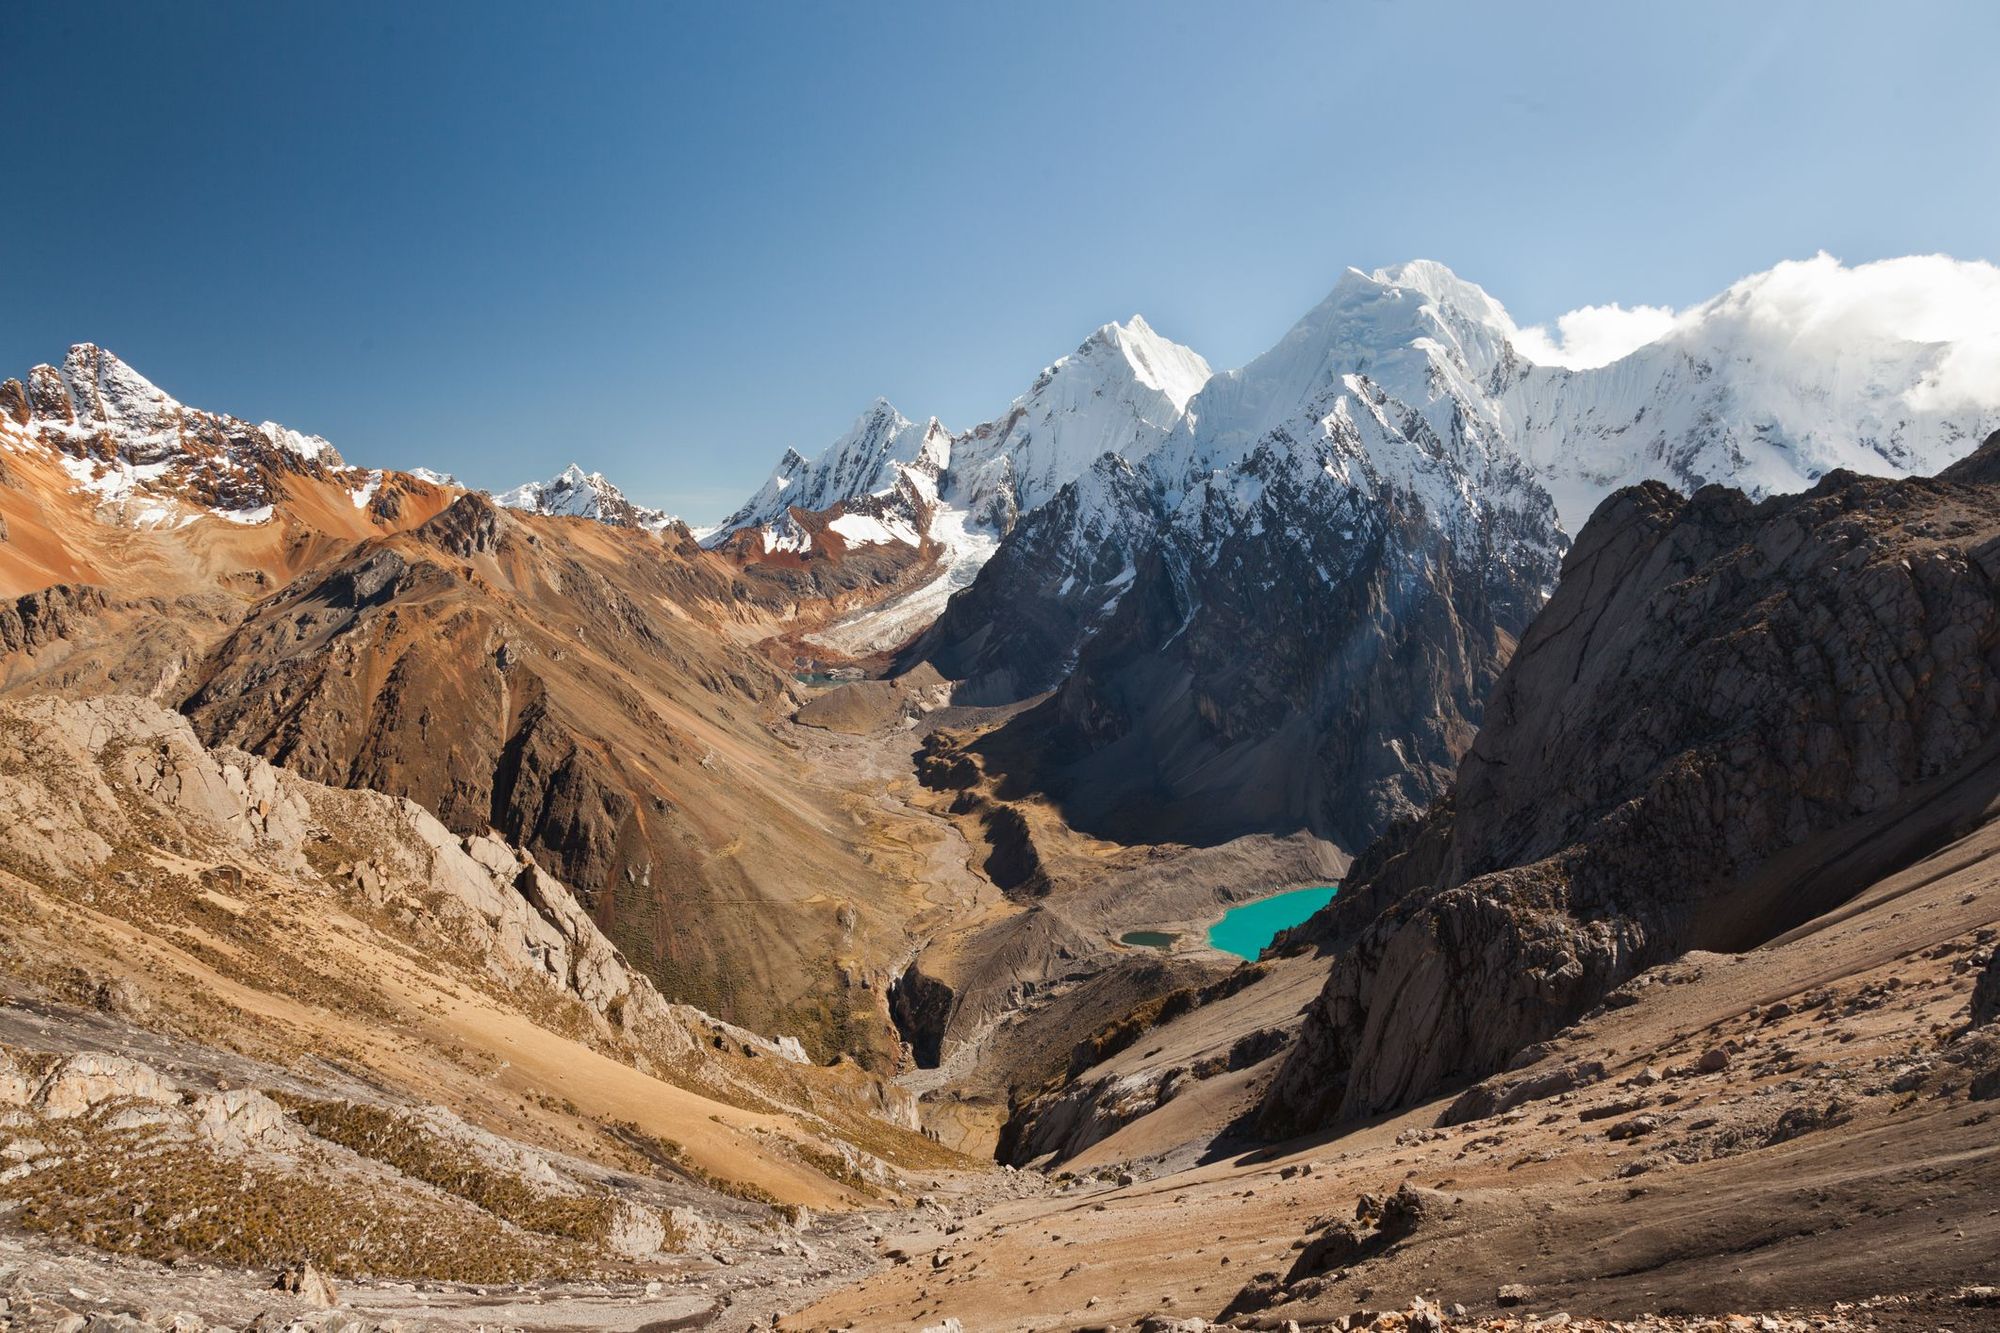  Cordillera Huayhuash, a popular trekking route in the Andes.